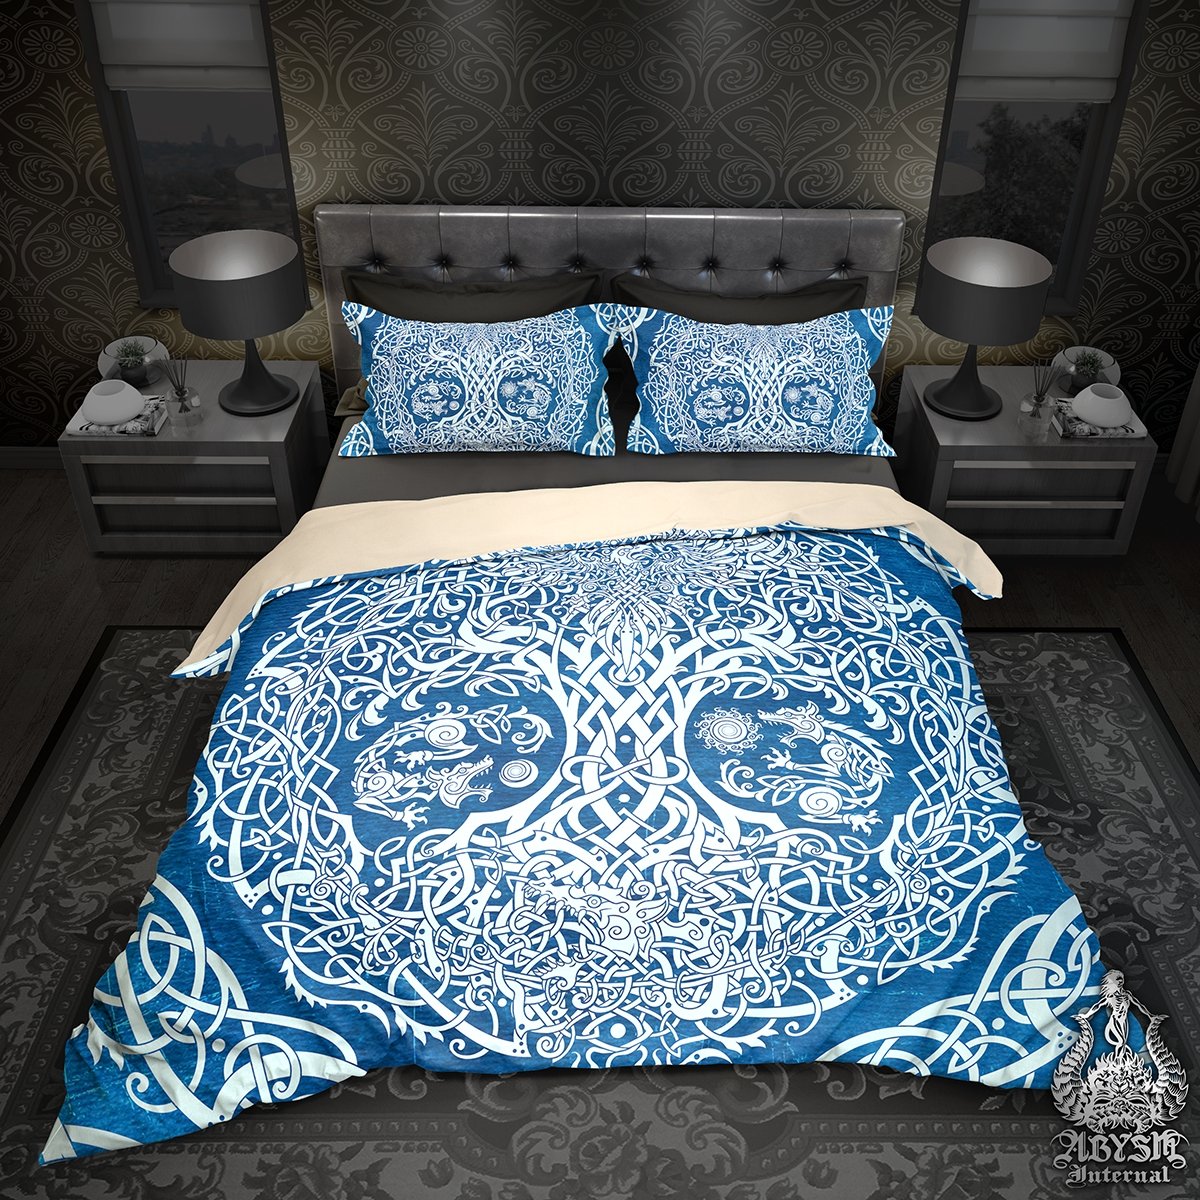 Viking Bedding Set, Comforter and Duvet, Yggdrasil Bed Cover and Bedroom Decor, Norse Art, King, Queen and Twin Size - Blue - Abysm Internal